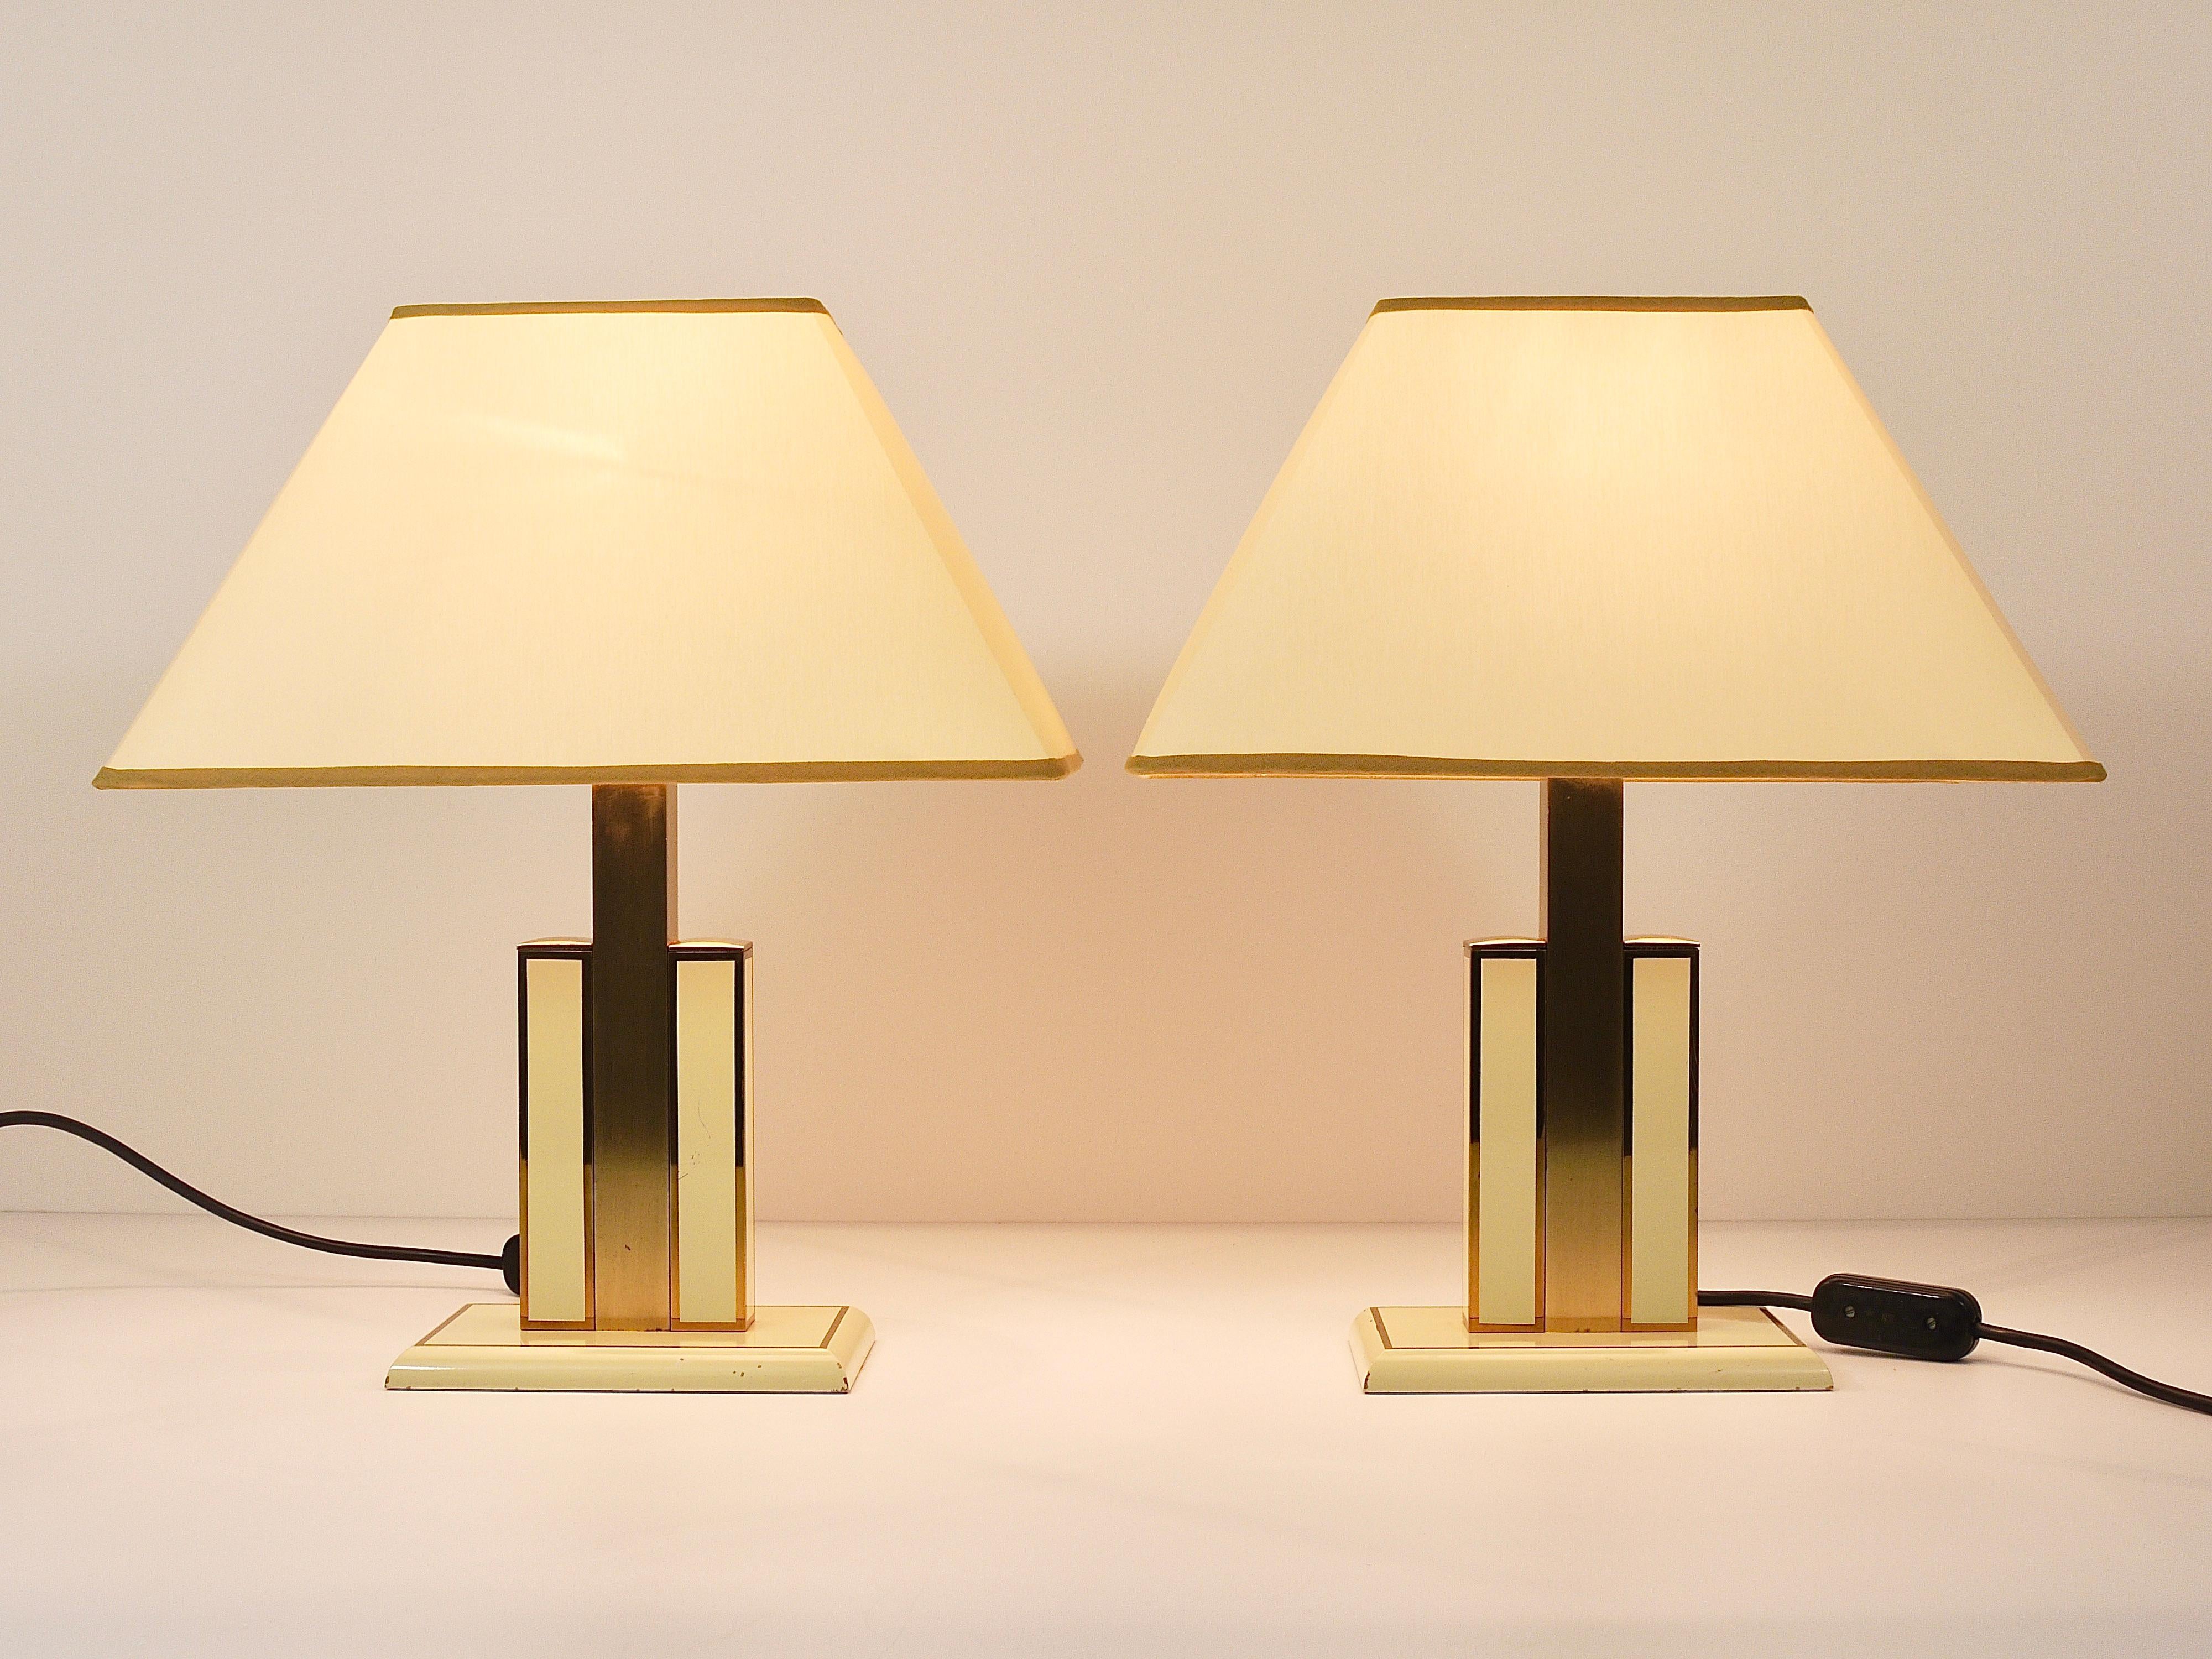 A pair of hollywood regency geometrical brass table / side lamps from the 1970s, designed by Romeo Rega, Italy. Romeo Rega was one of the leading contemporary designers in Italian design, alongside artists such as Willy Rizzo and Maison Jansen. The